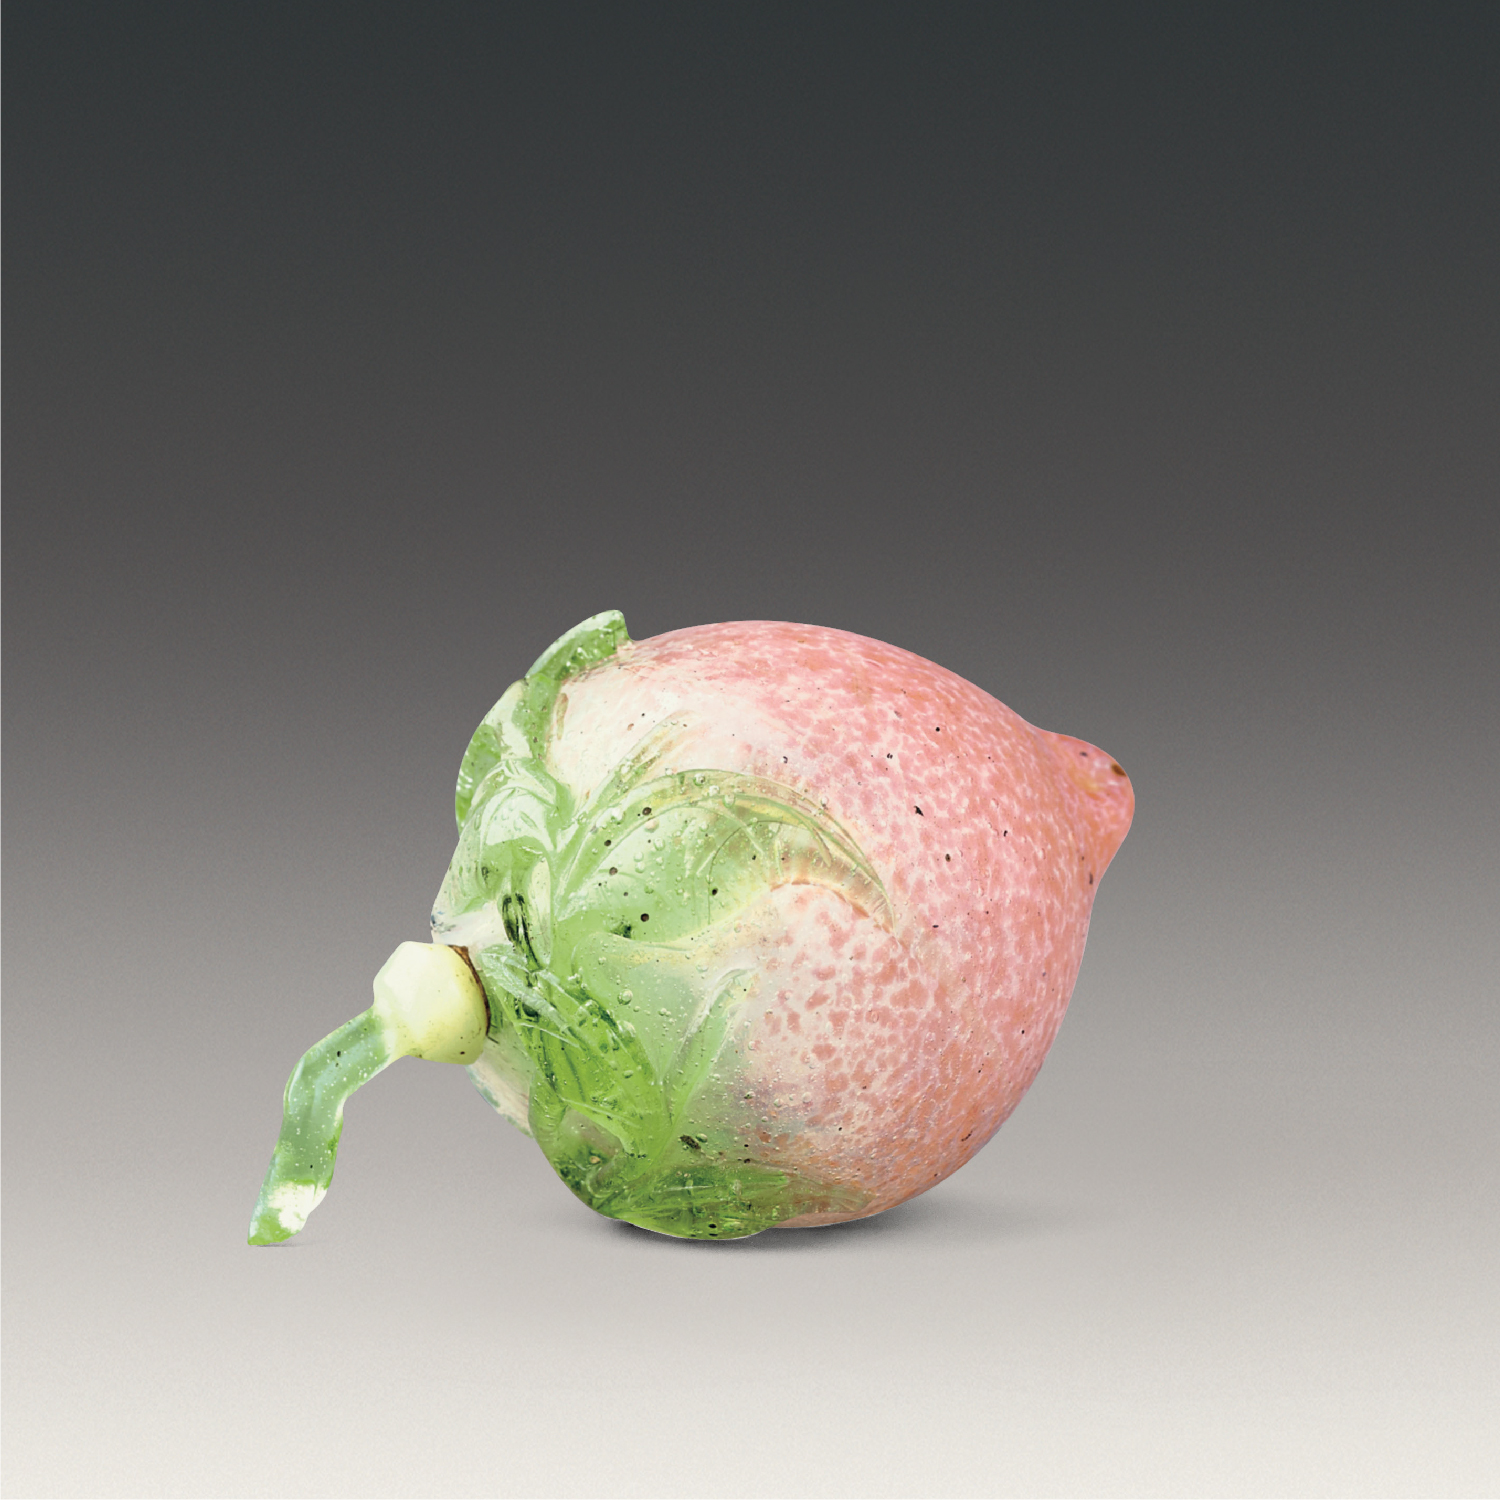 Peach-shaped snuff bottle in green overlay on pink ground